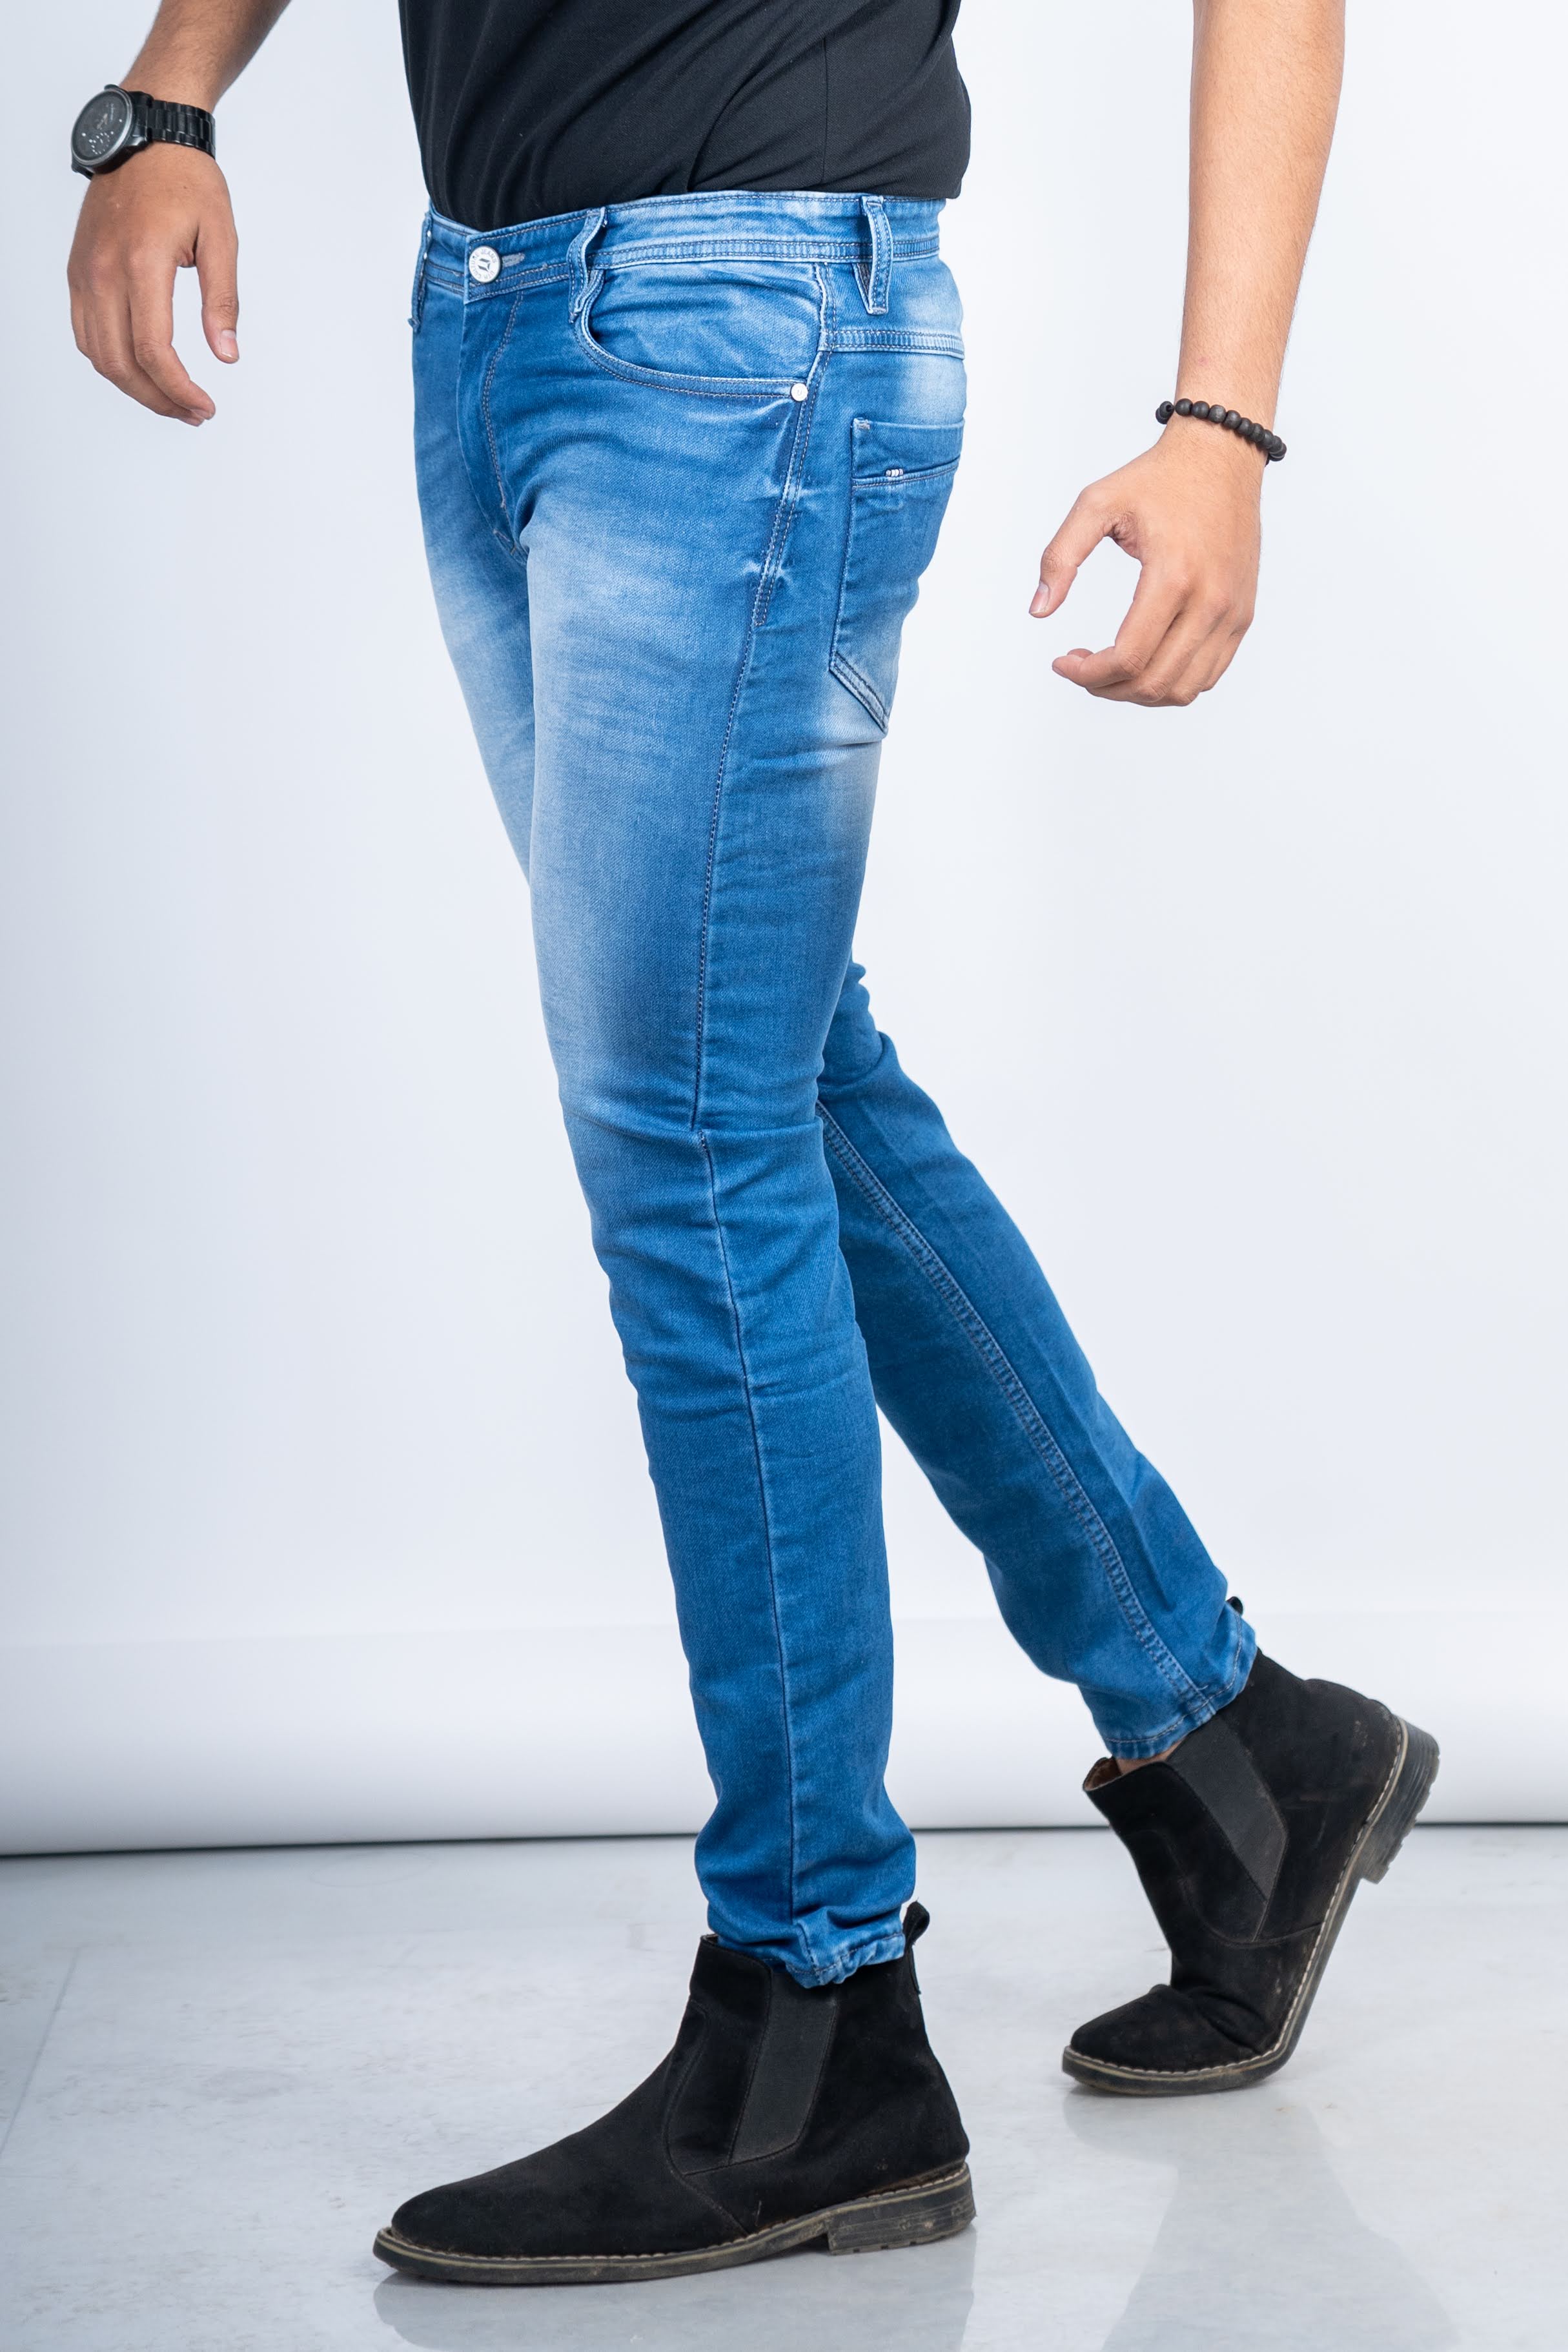 ICE BLUE SKINNY FIT JEANS